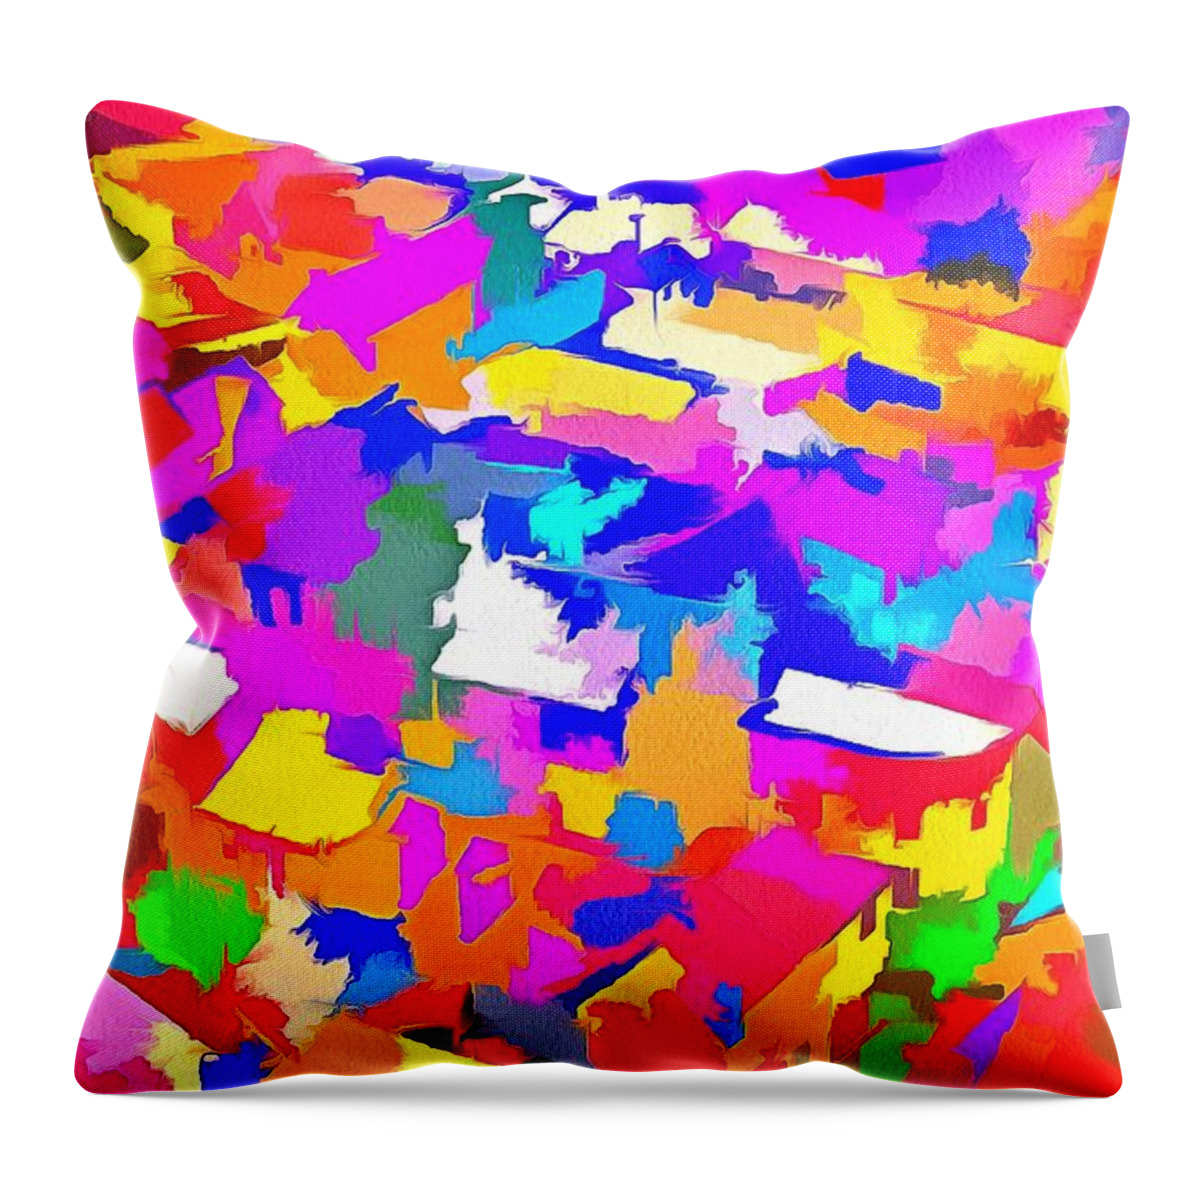 City Of Colours. Throw Pillow featuring the painting City Of Colours by Maciek Froncisz